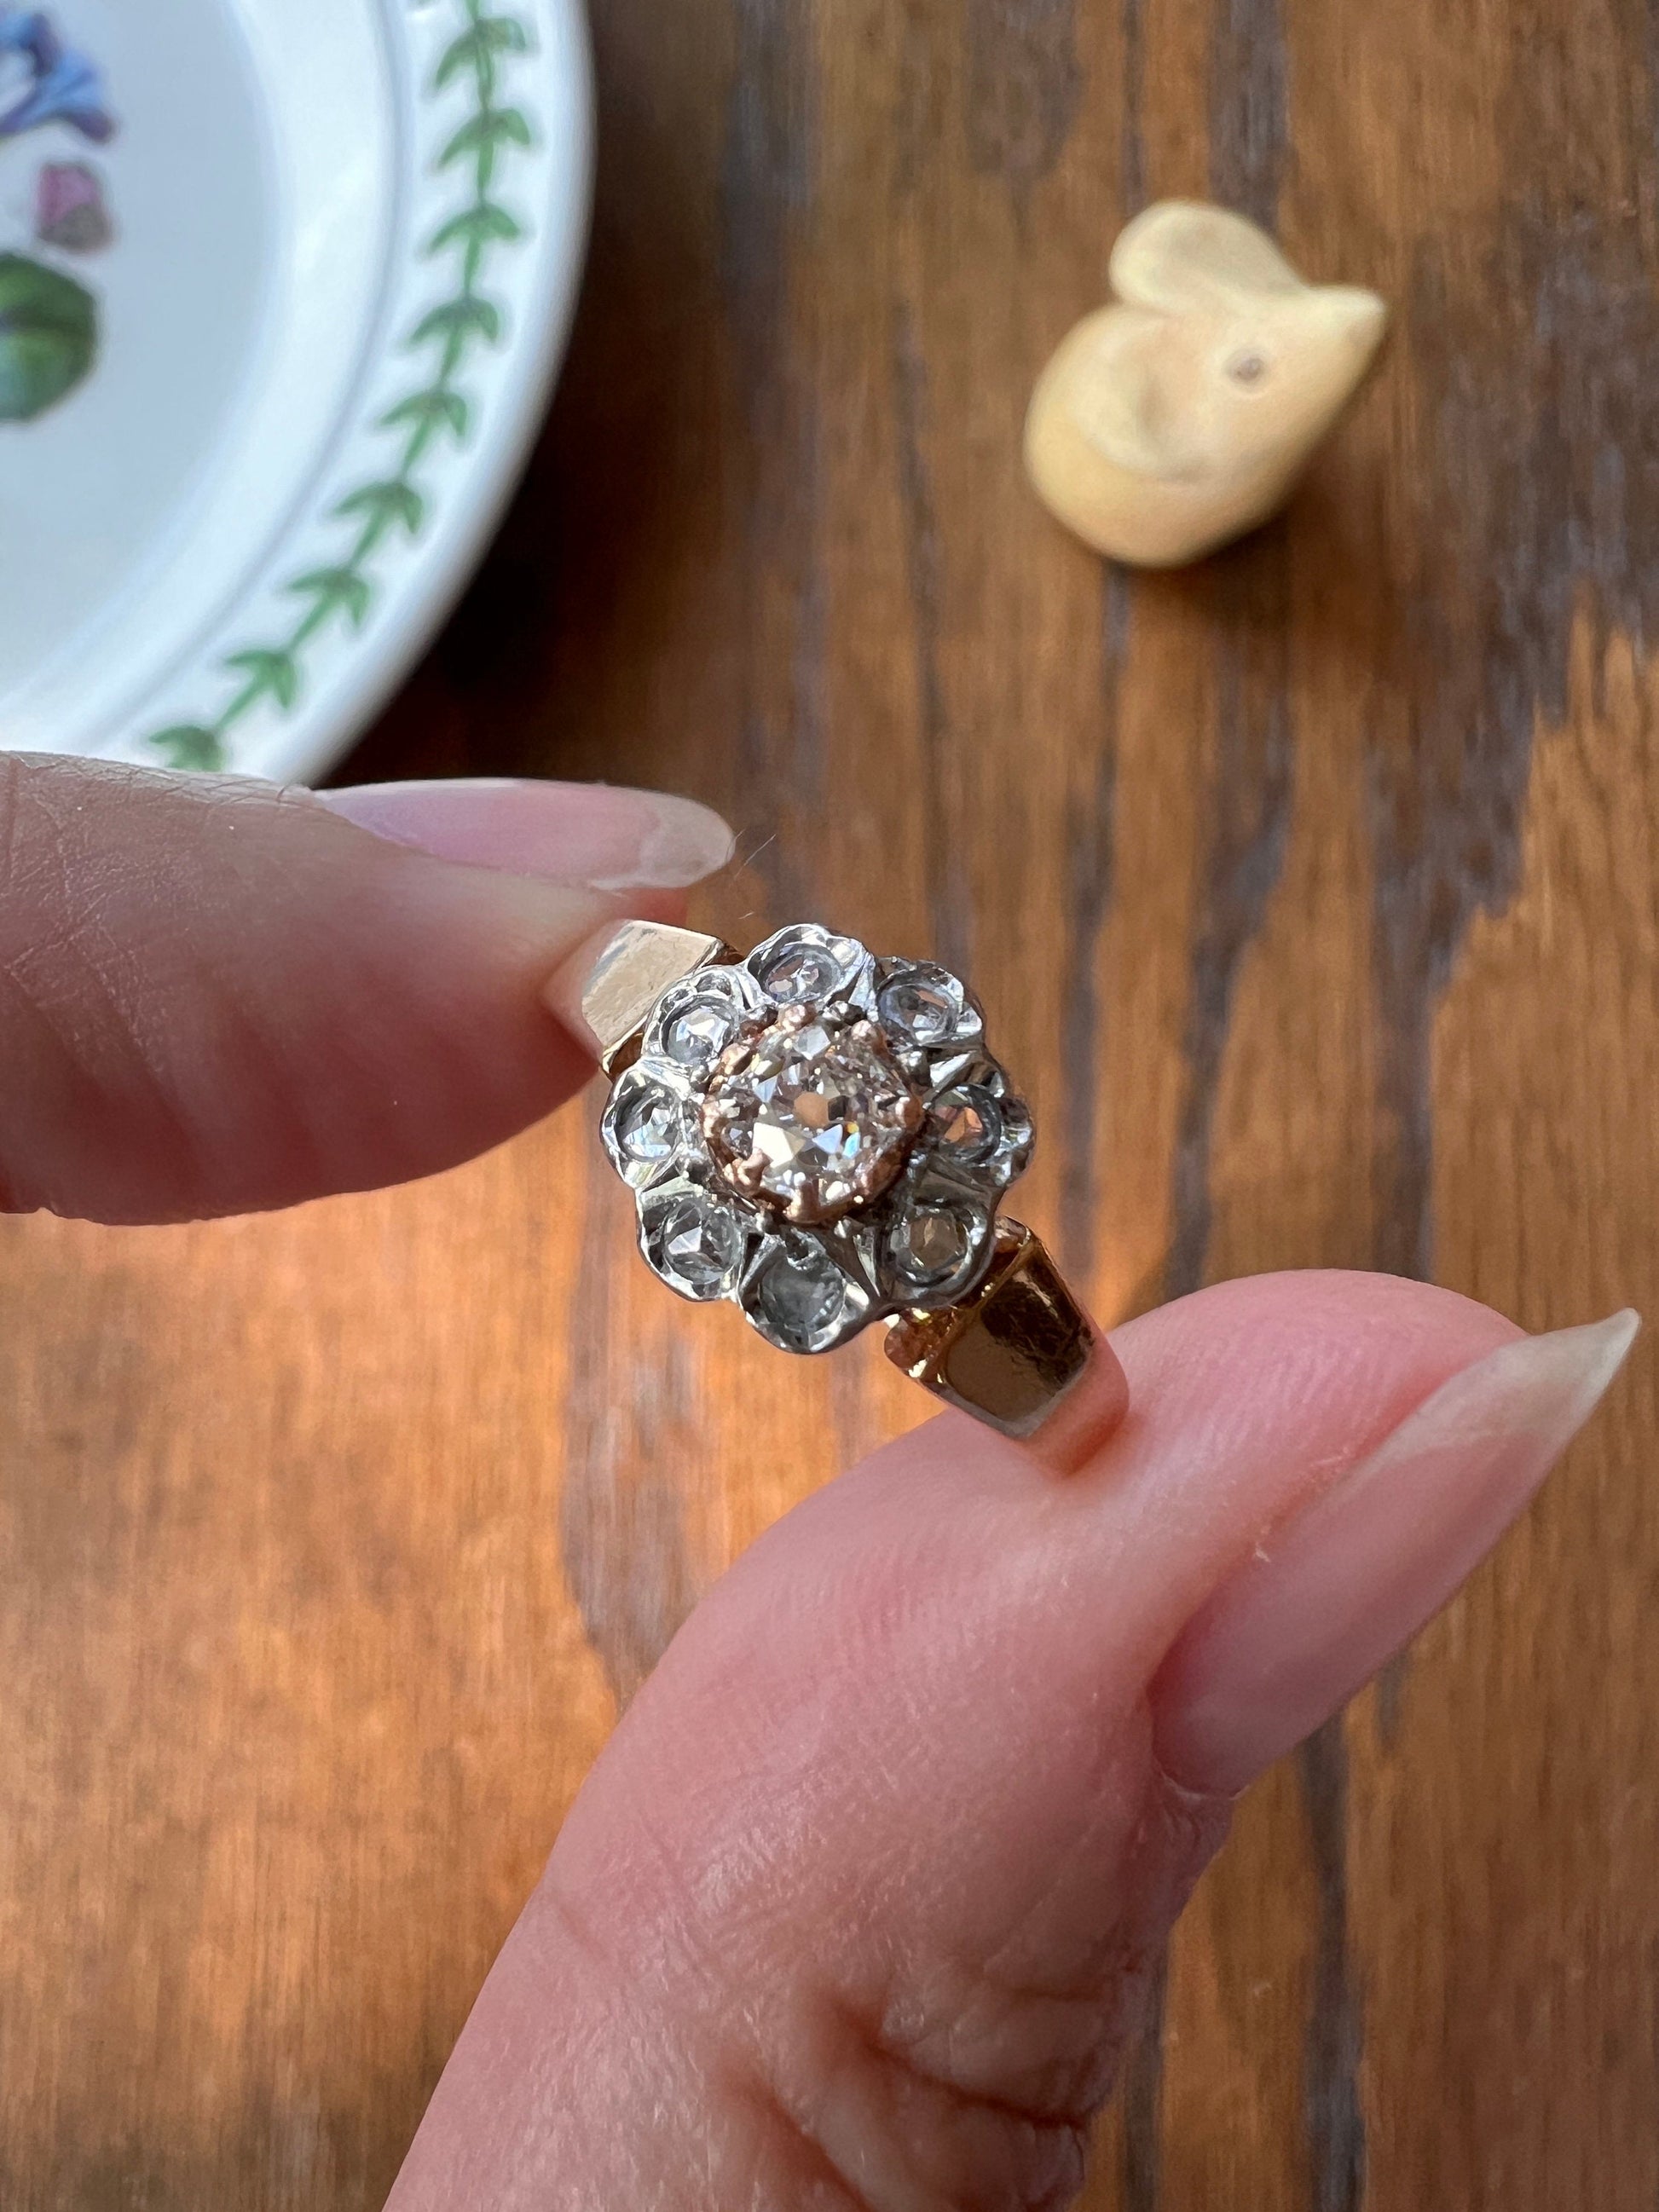 CLUSTER Ring Old Mine Cut Rose Cut DIAMOND Daisy Floral French Victorian Antique 18k Gold Ring Stacker Band Belle Epoque Romantic Gift OMC